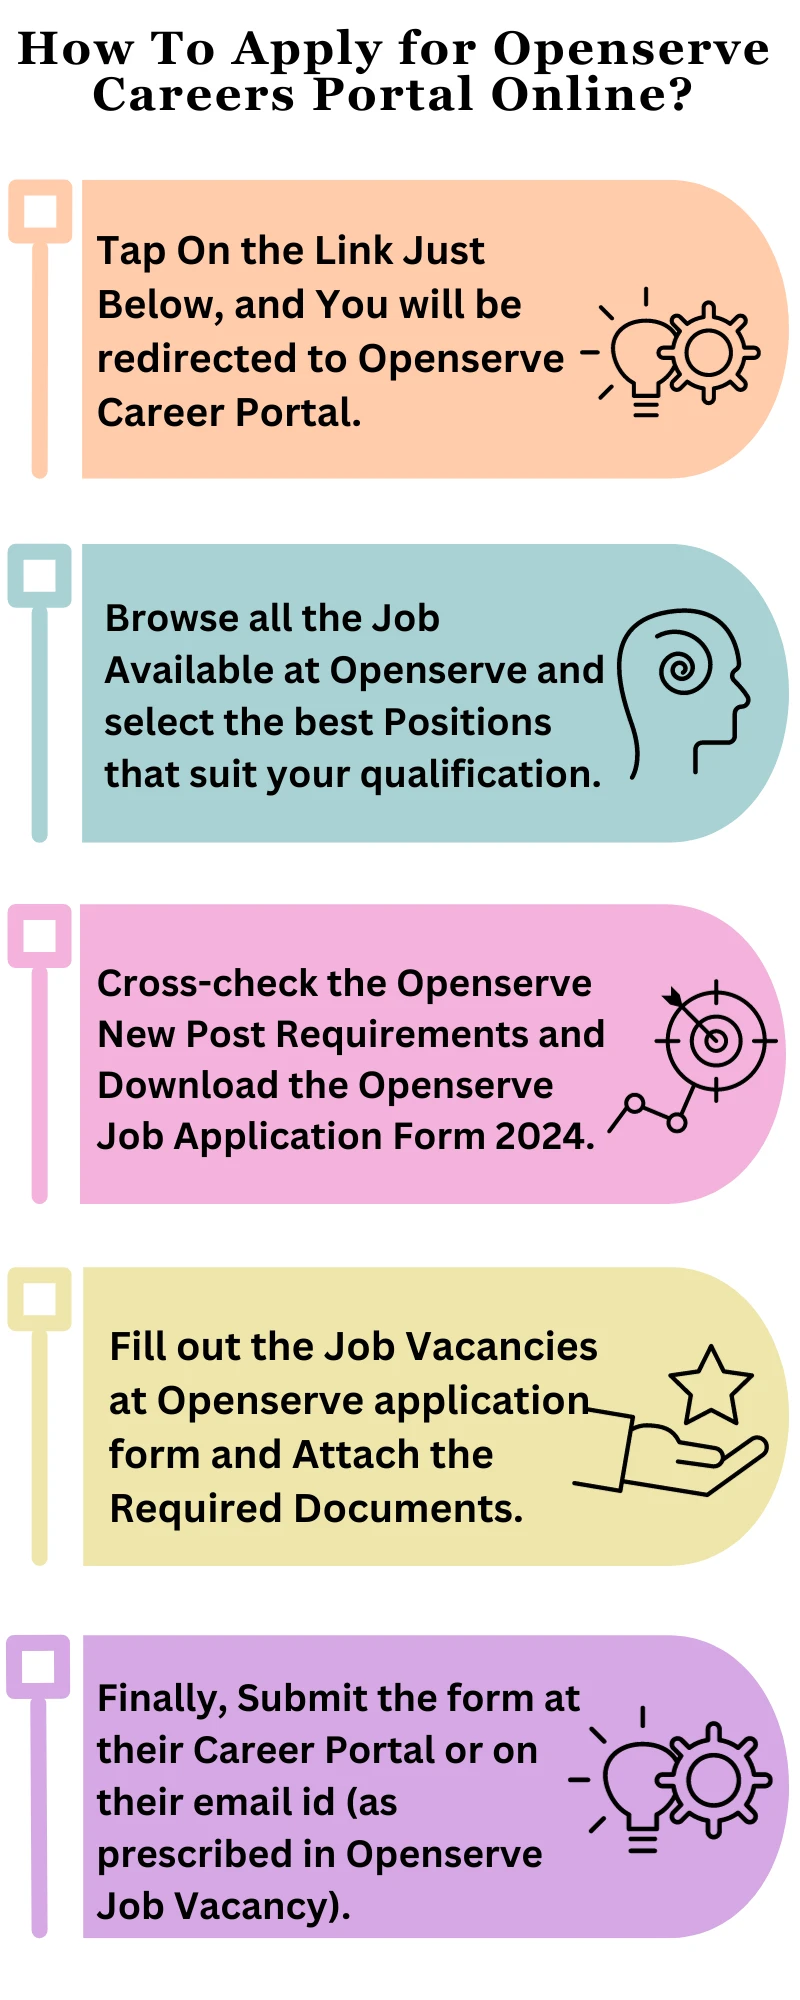 How To Apply for Openserve Careers Portal Online?